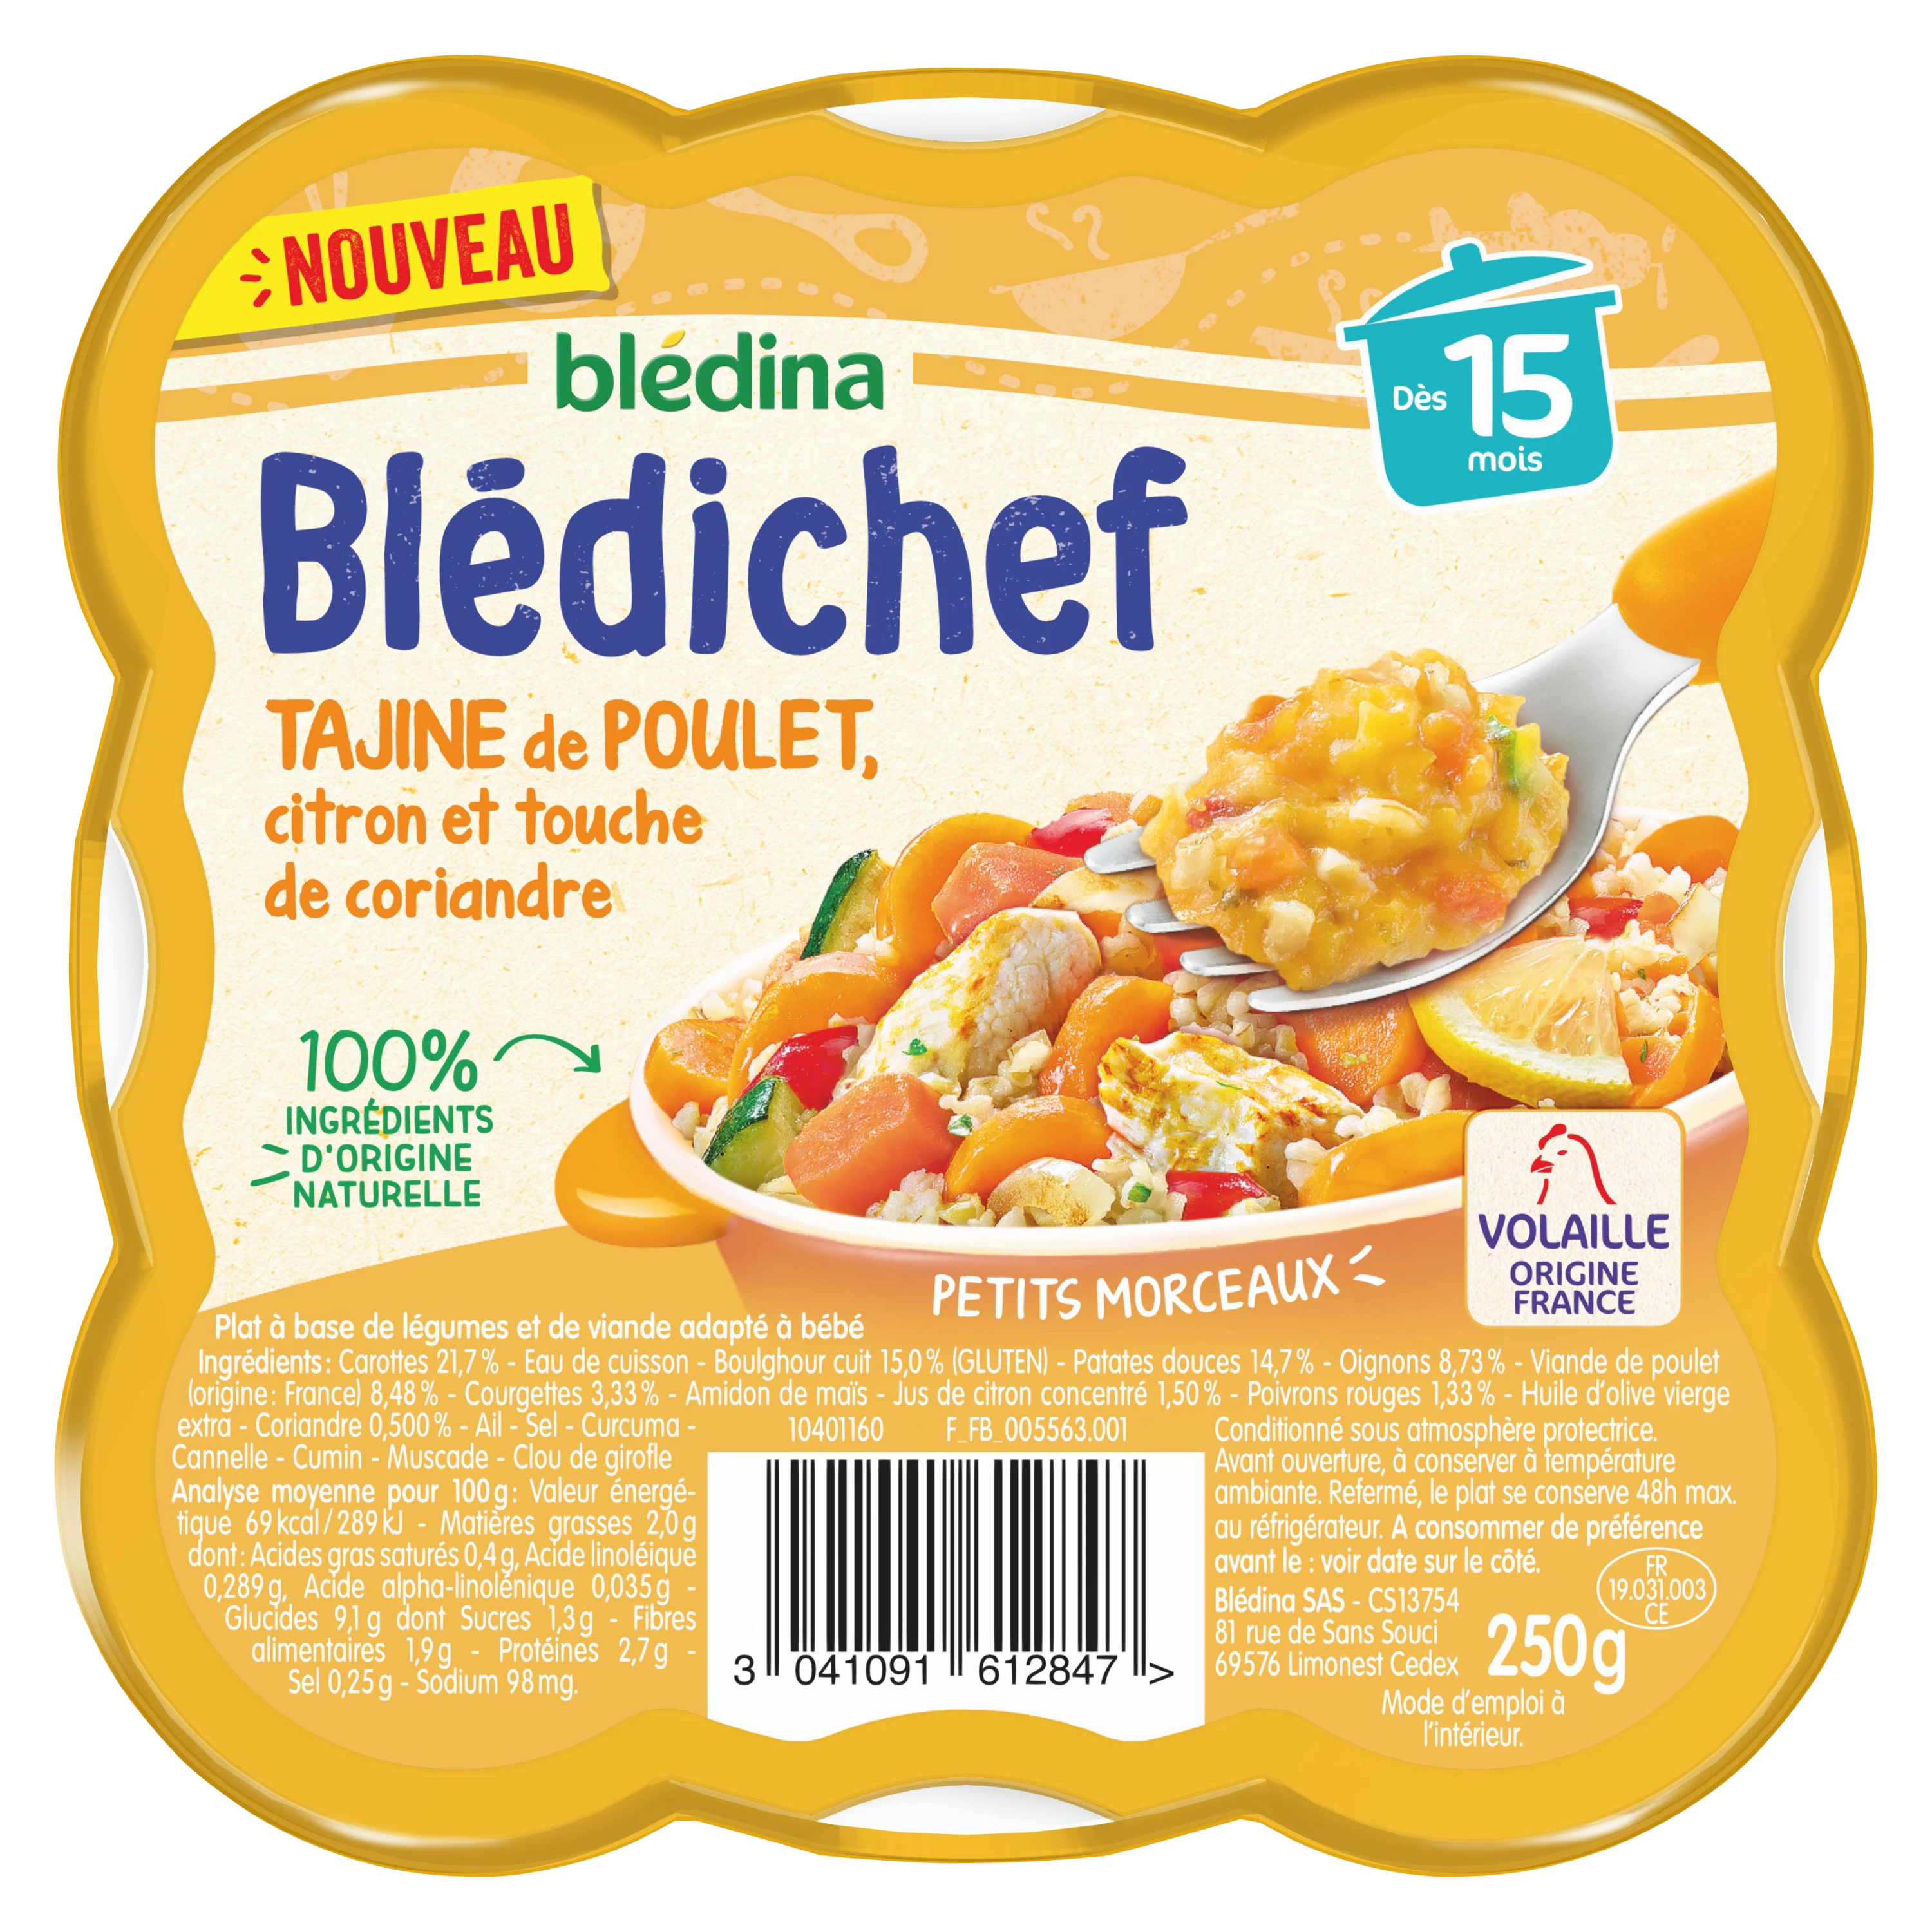 Blédichef Baby dish from 15 months of lemon chicken tagine with a touch of coriander 250g - BLEDINA